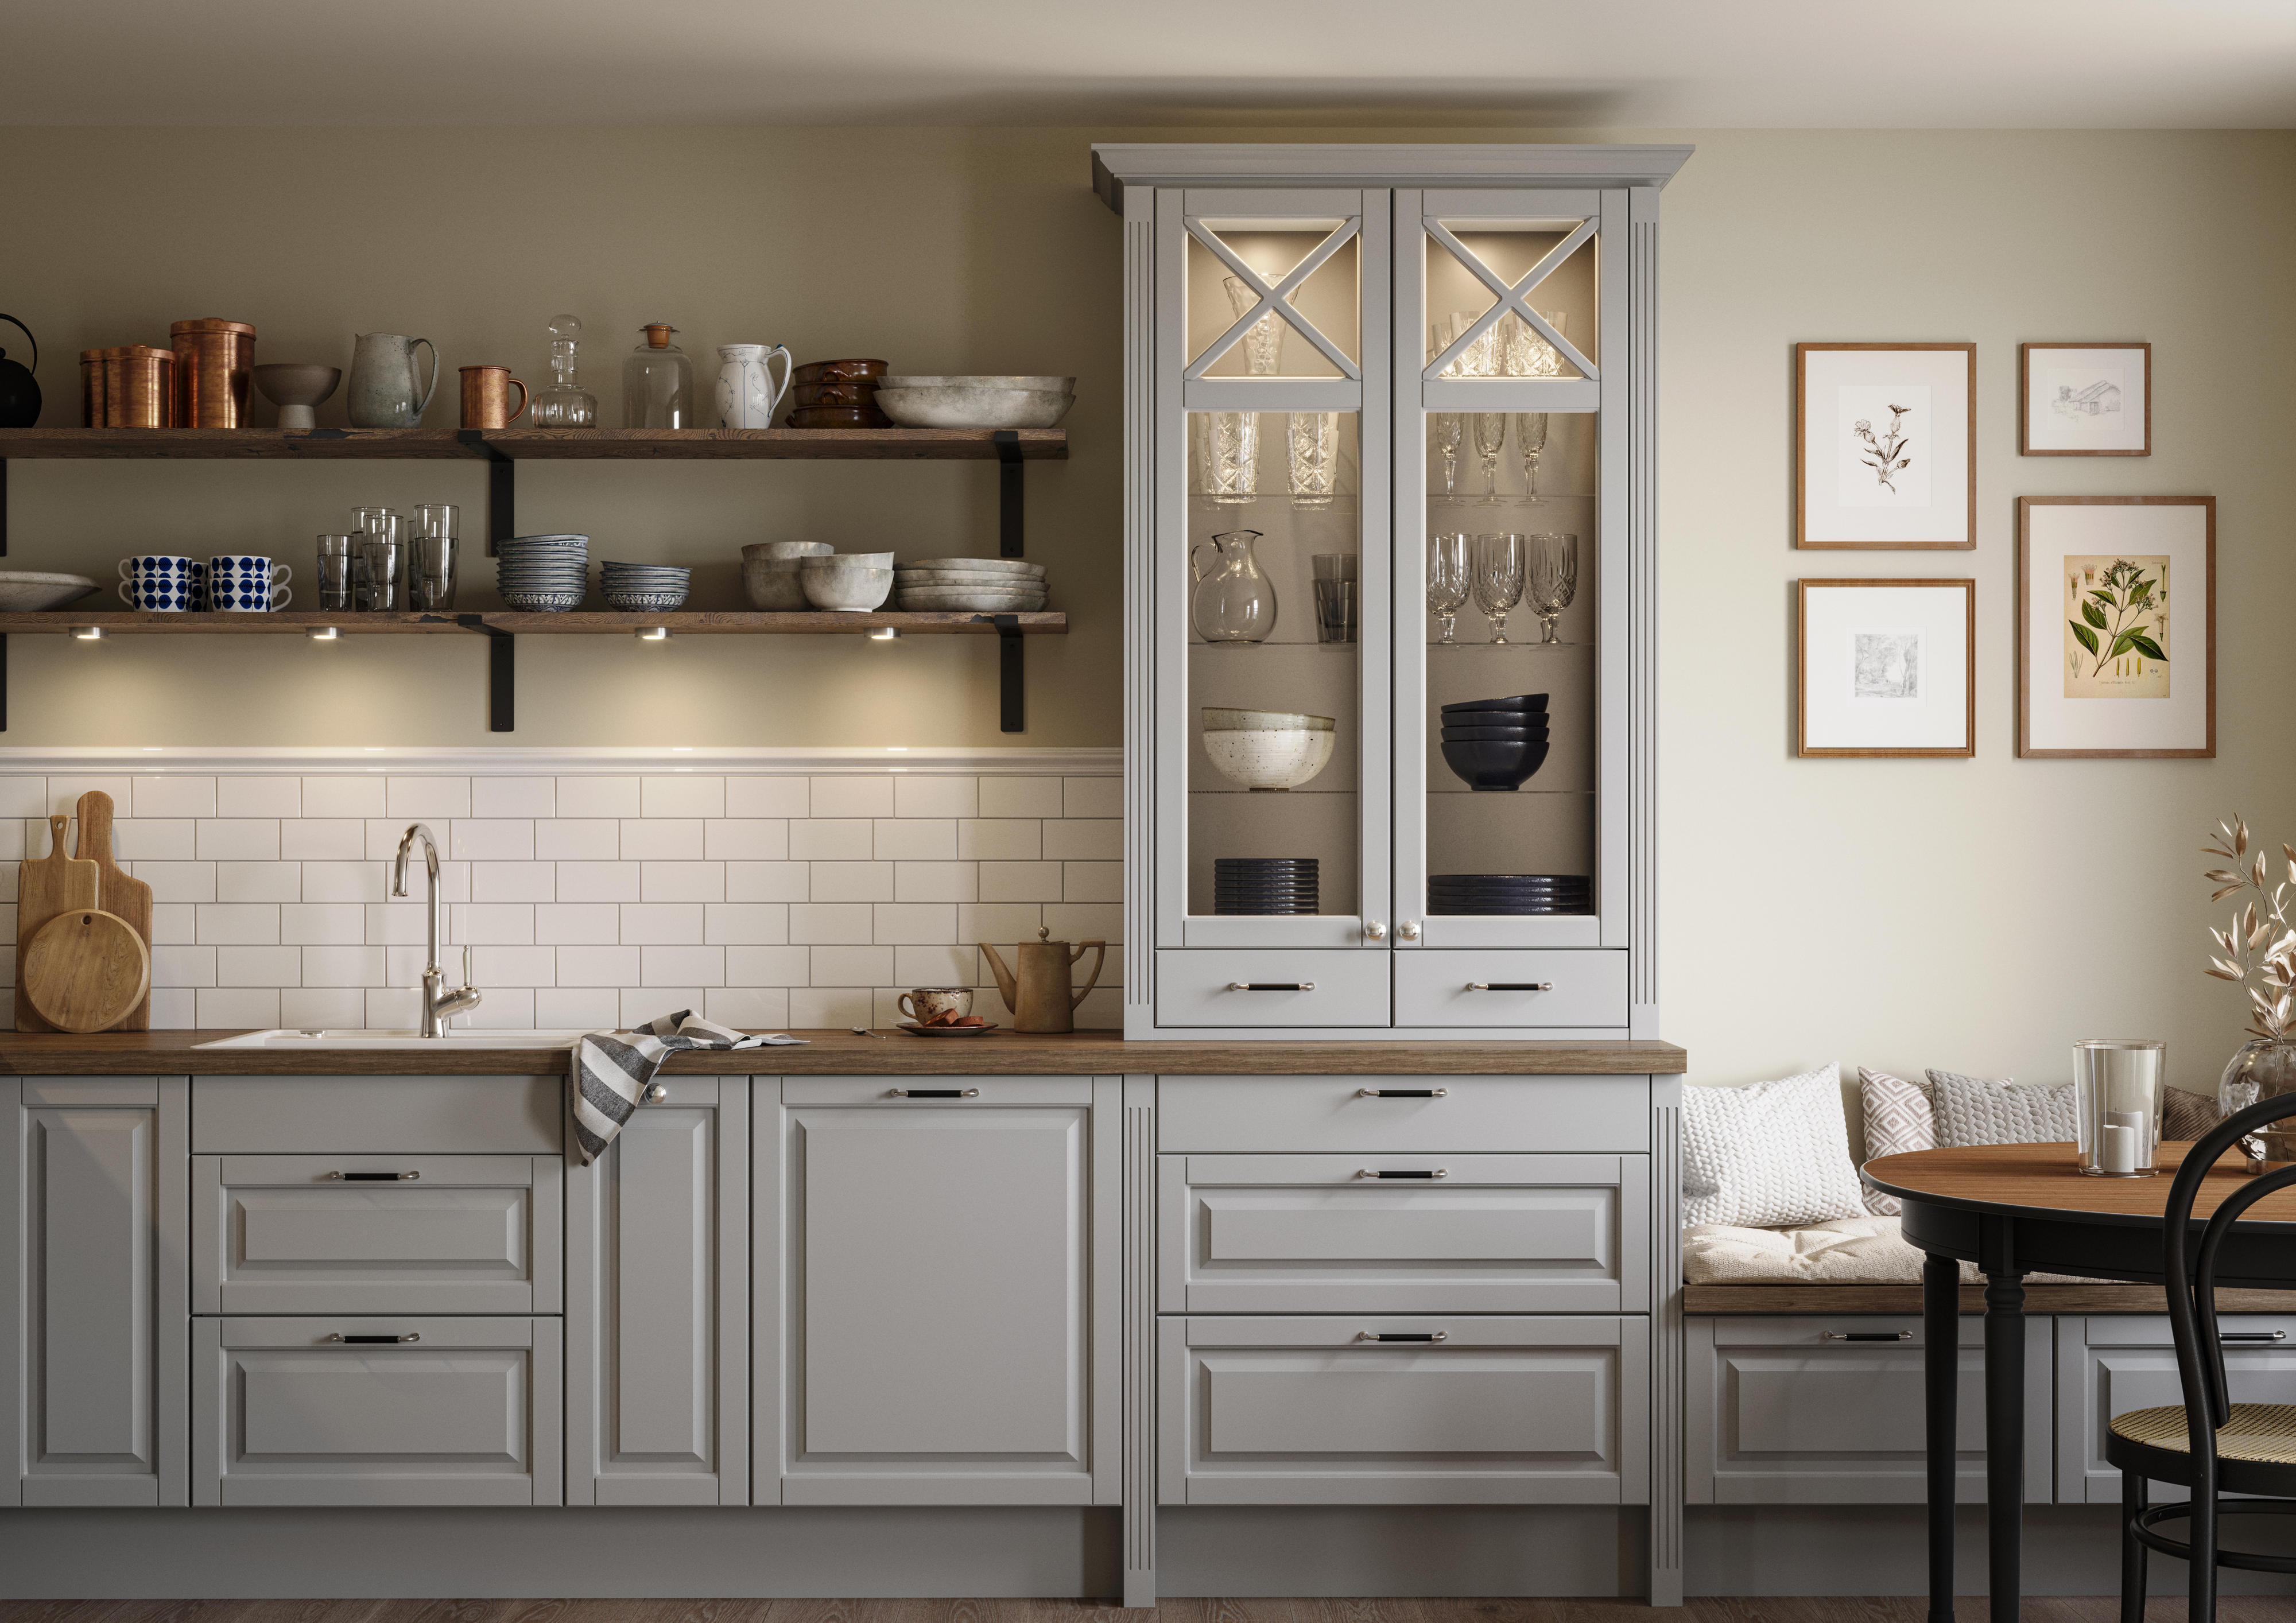 Full Epoq Heritage Light Grey kitchen with Glass Cabinet and laminate Medusa Brown worktop